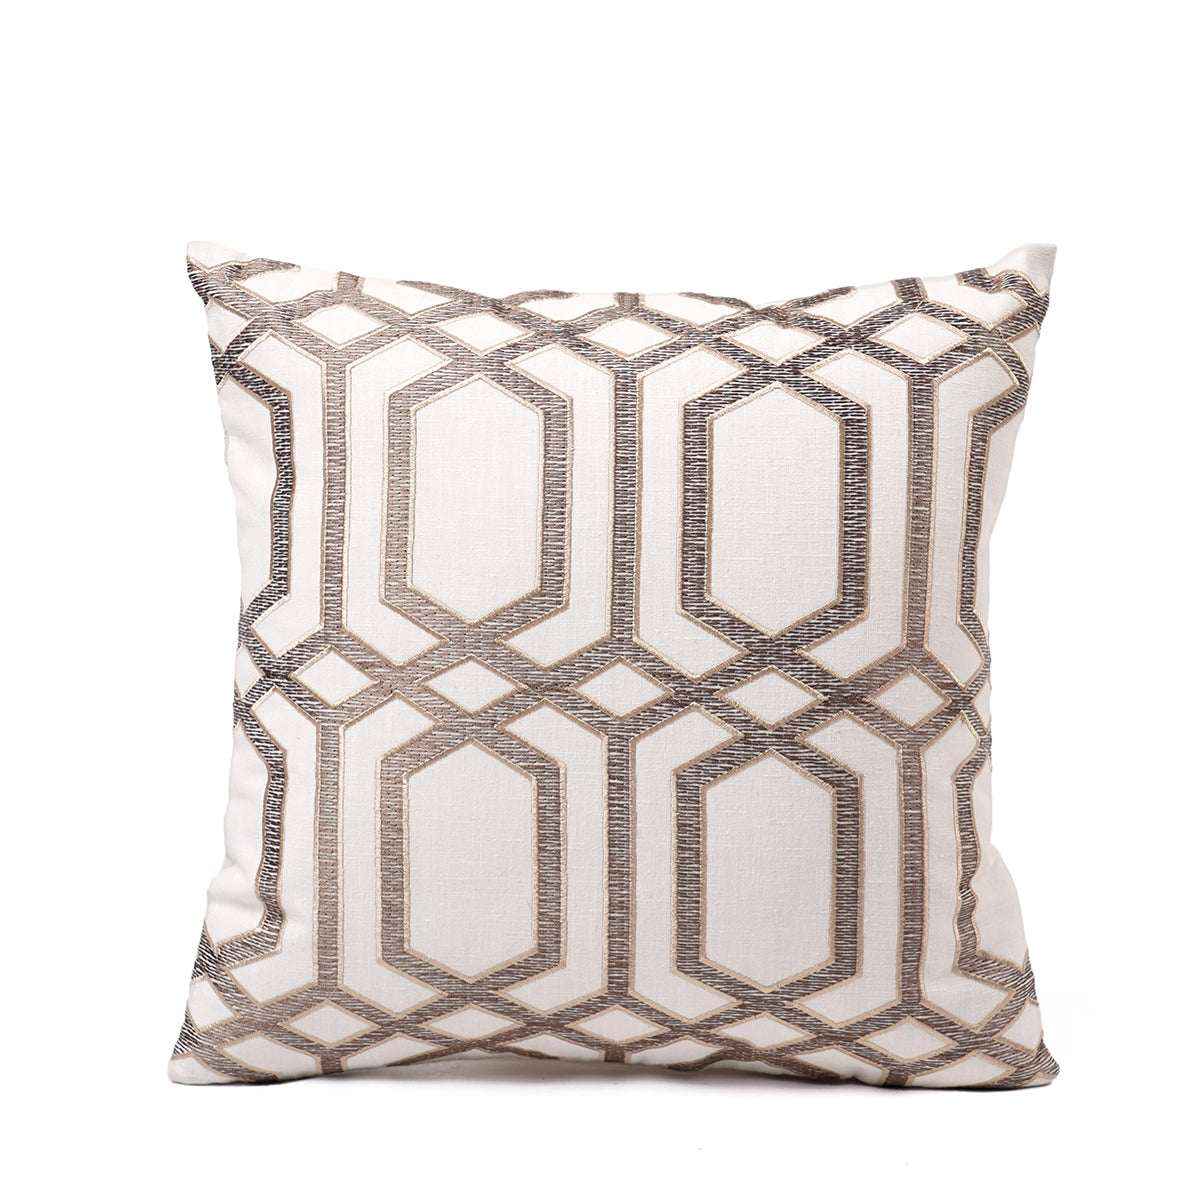 Imperial - White and Beige Ogee pattern Embroidery pillow cover, Linen blend fabric, available in 16X16 inches, custom sizes on request